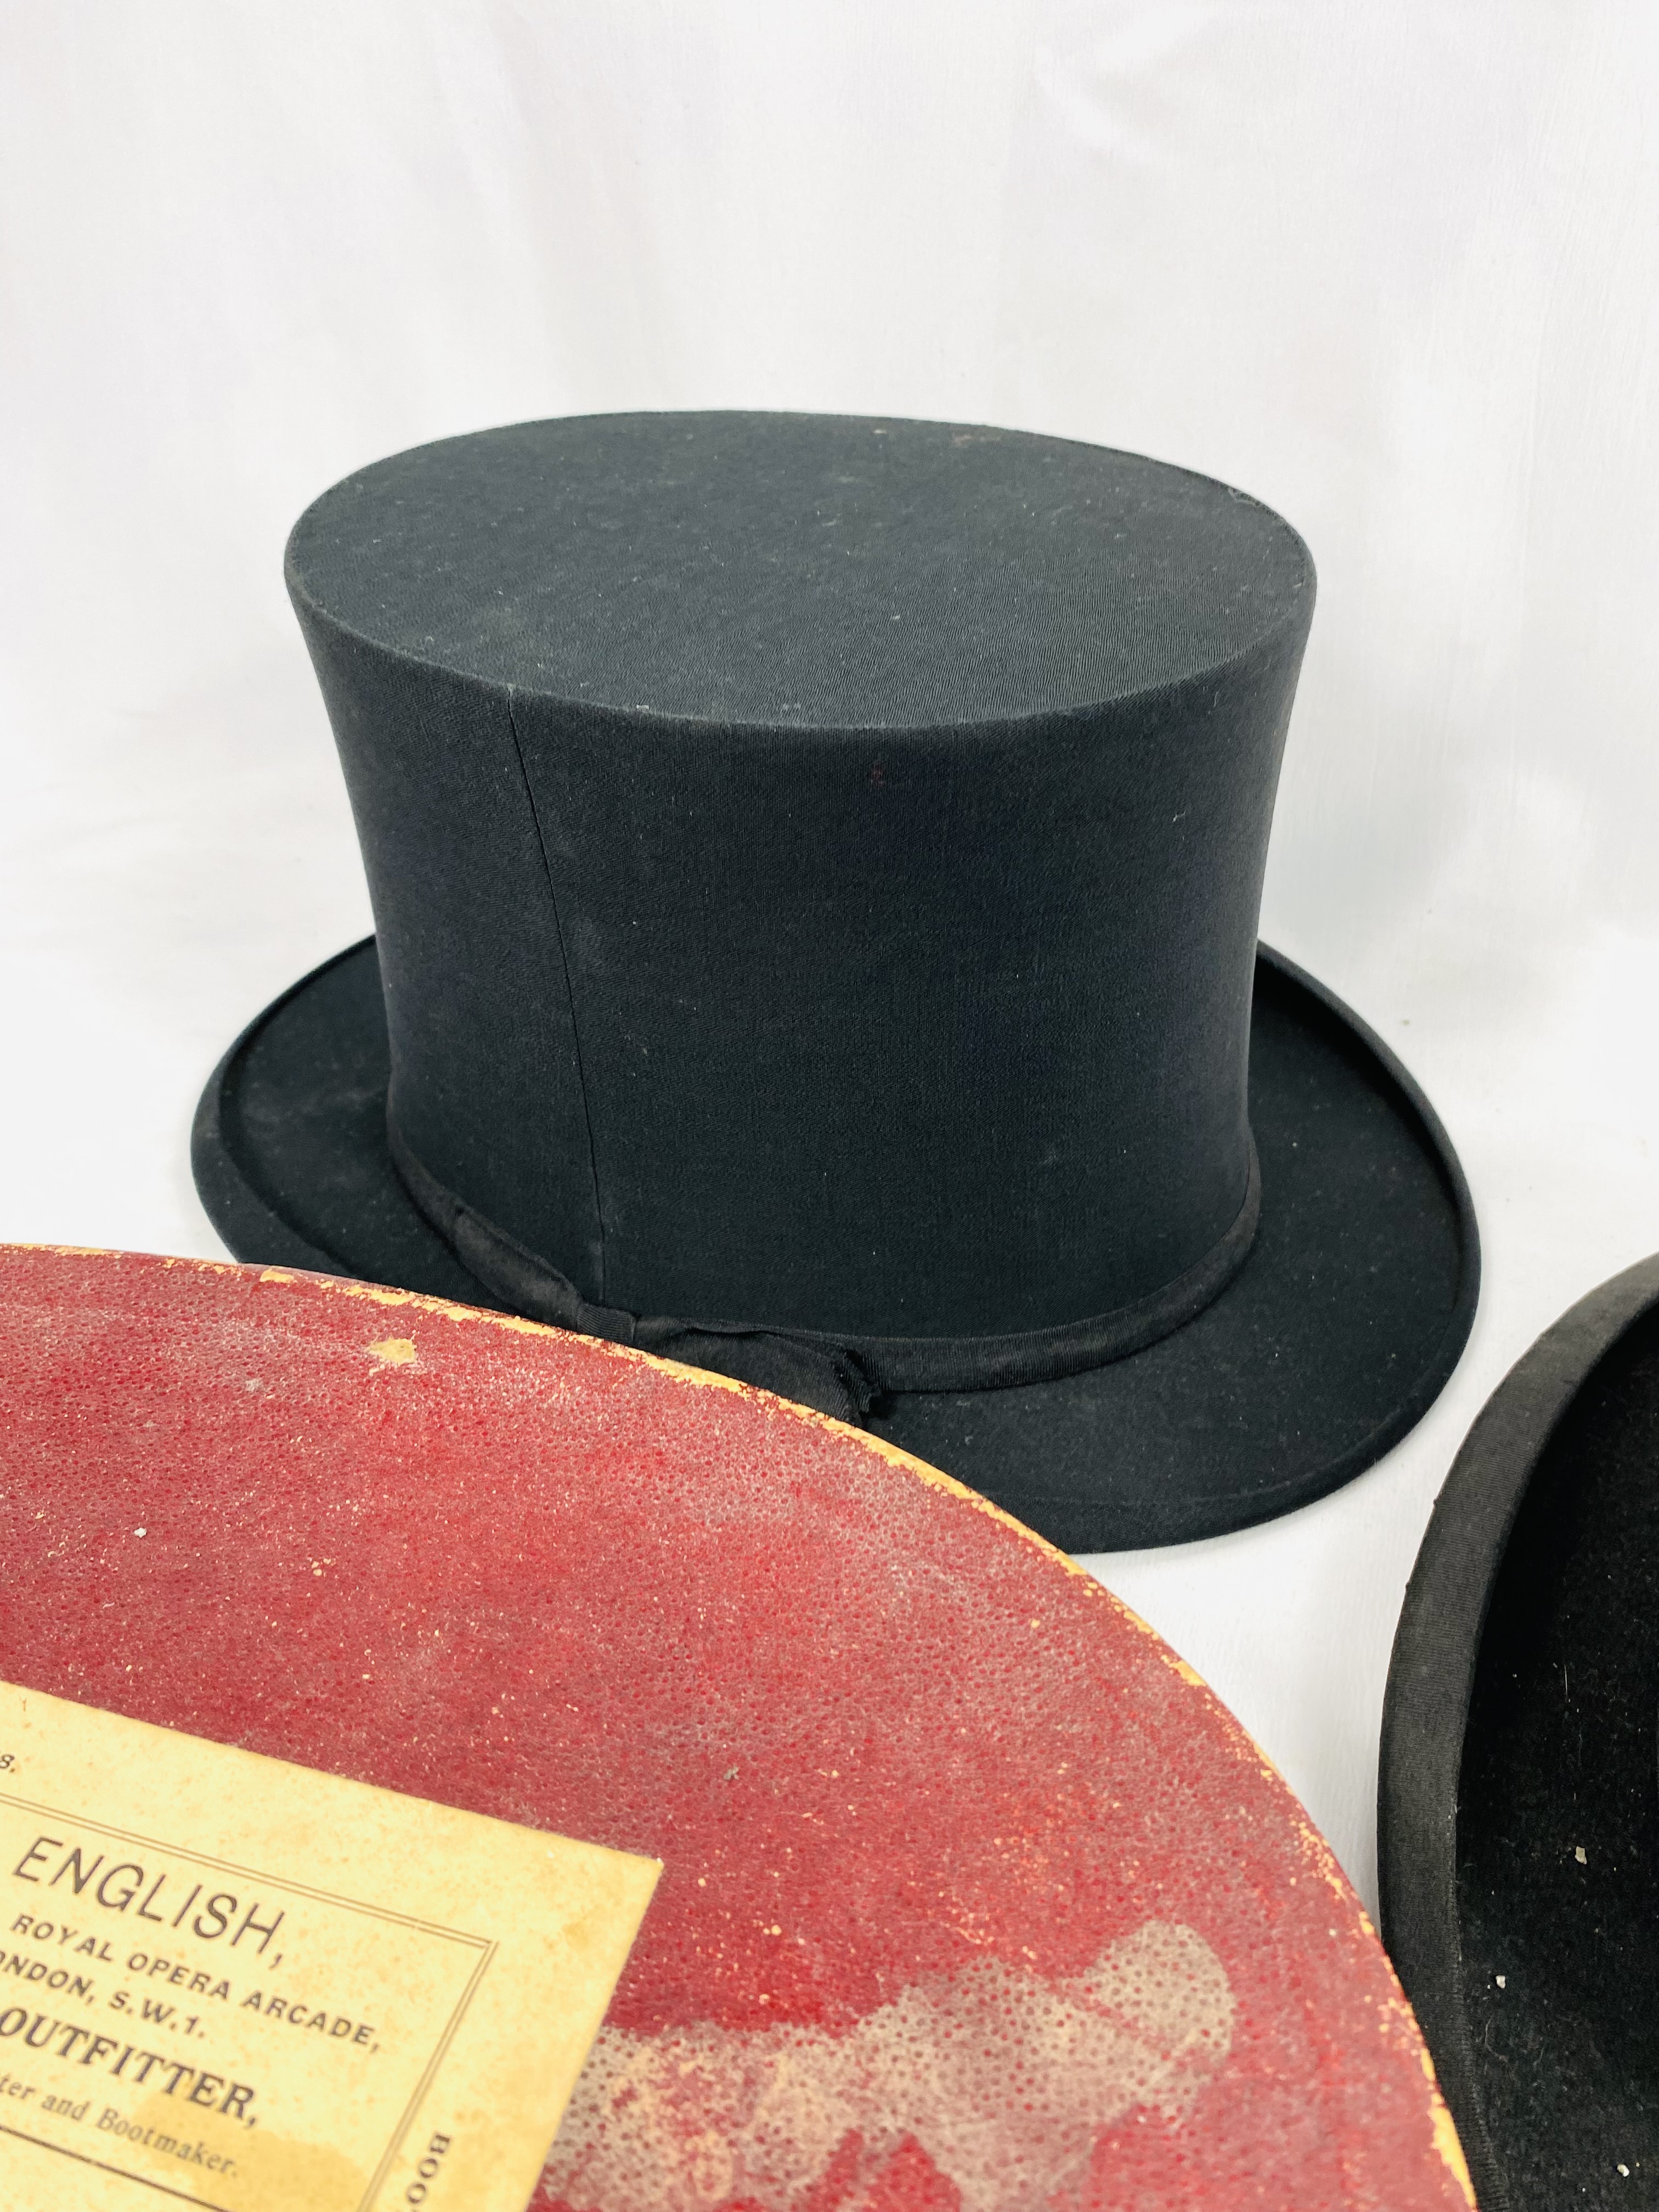 Scott & Co bowler hat together with a collapsible opera hat - Image 3 of 5